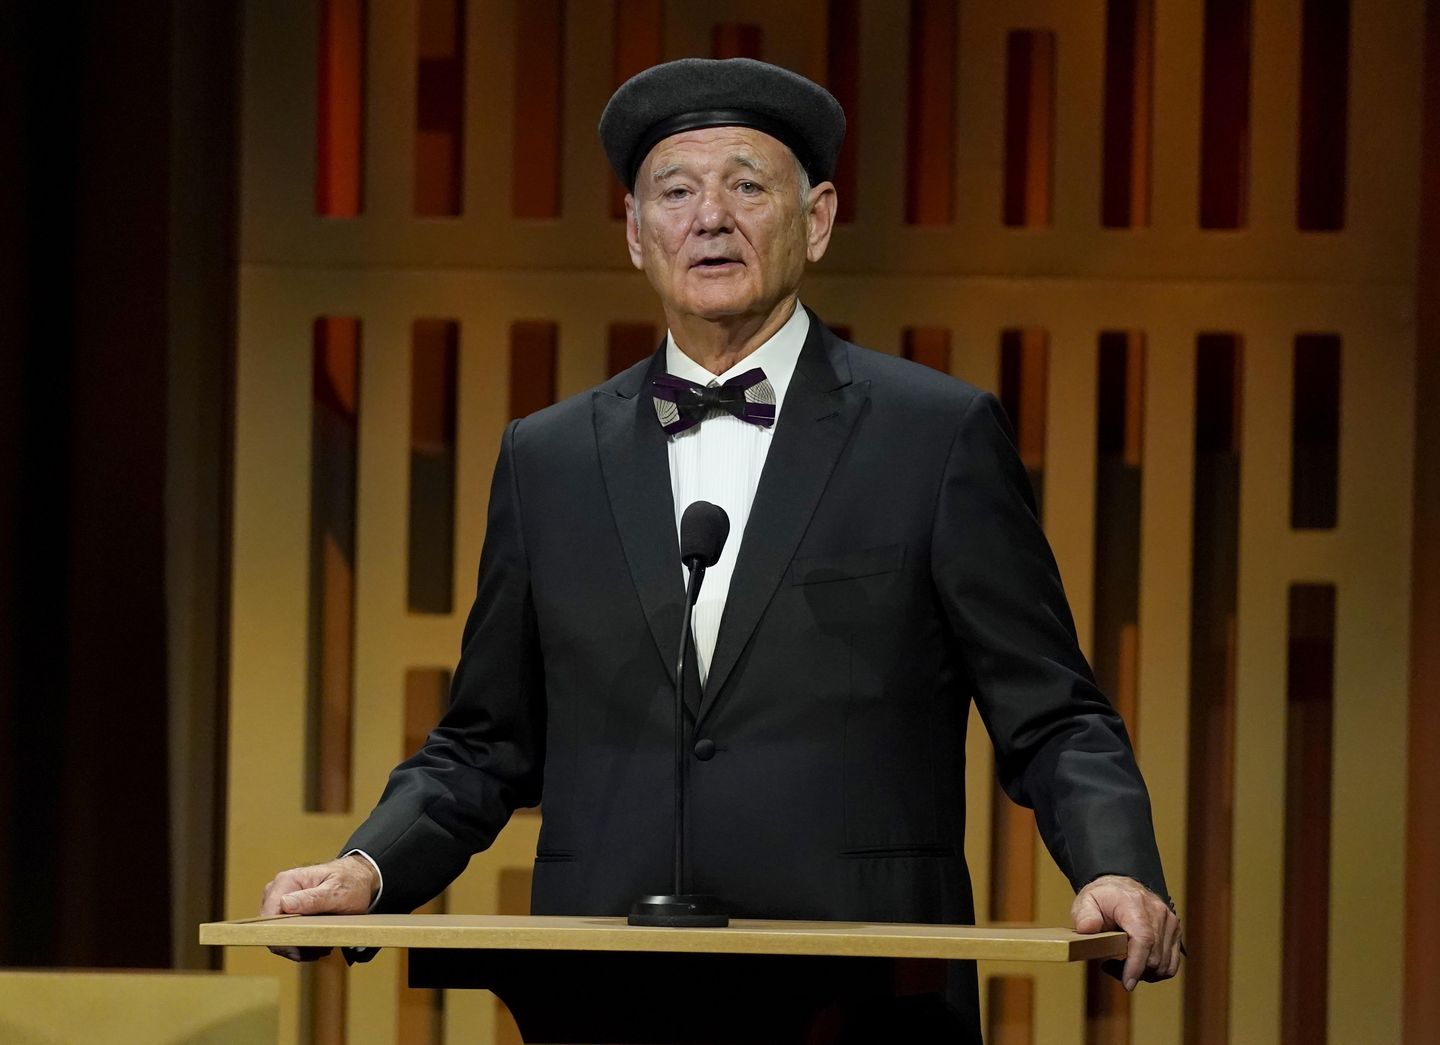 Bill Murray says his behavior led to complaint, film's pause